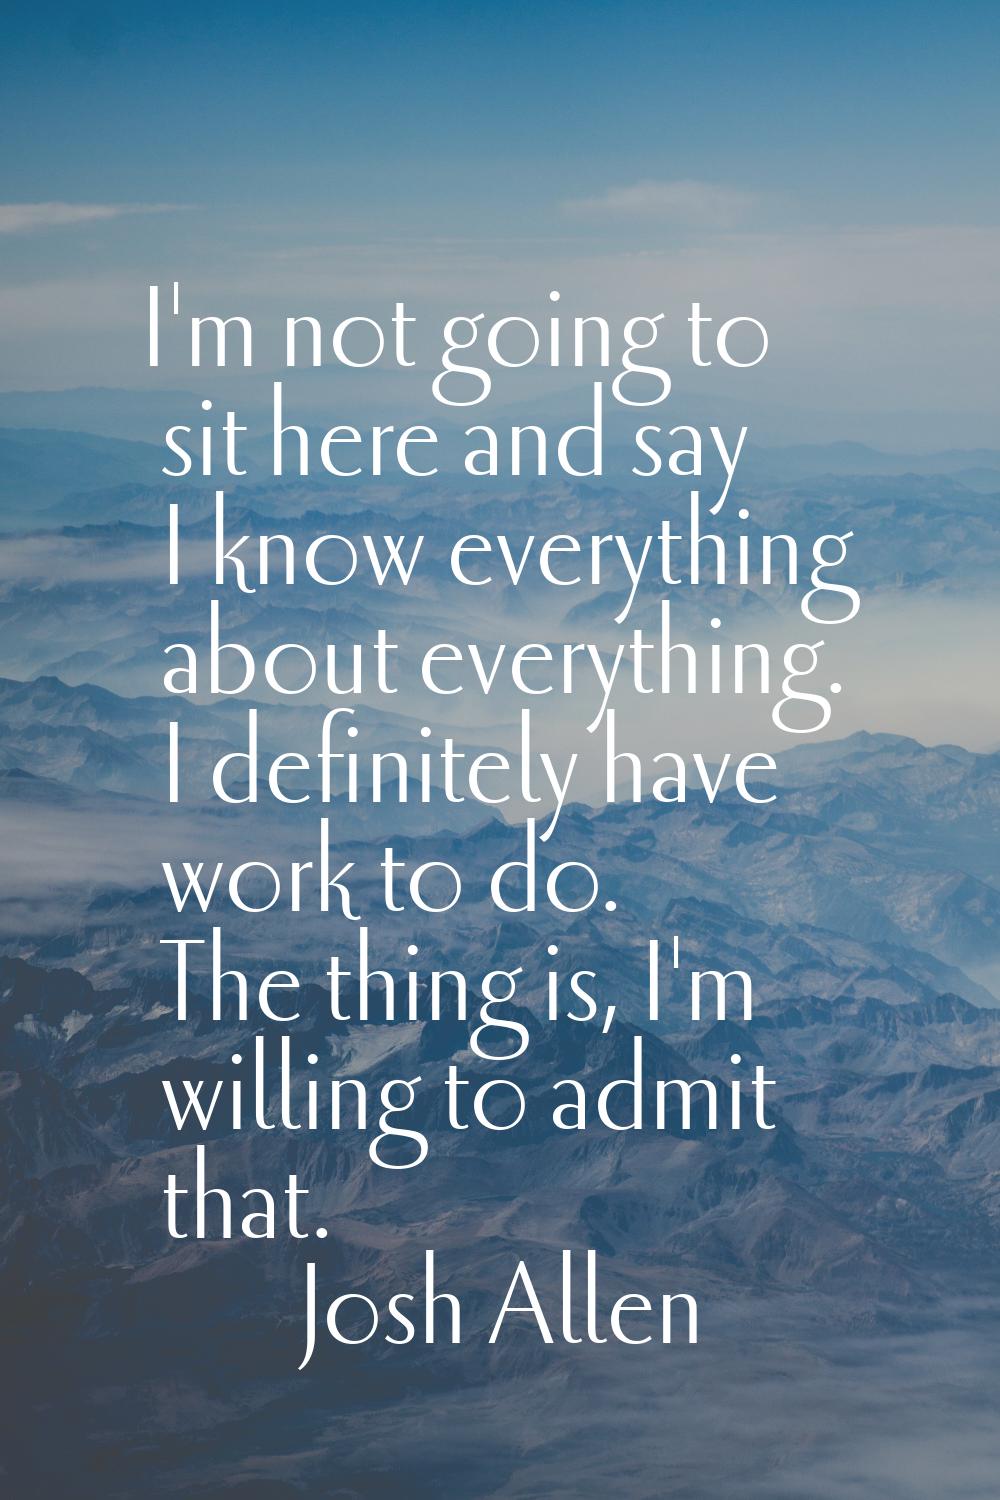 I'm not going to sit here and say I know everything about everything. I definitely have work to do.